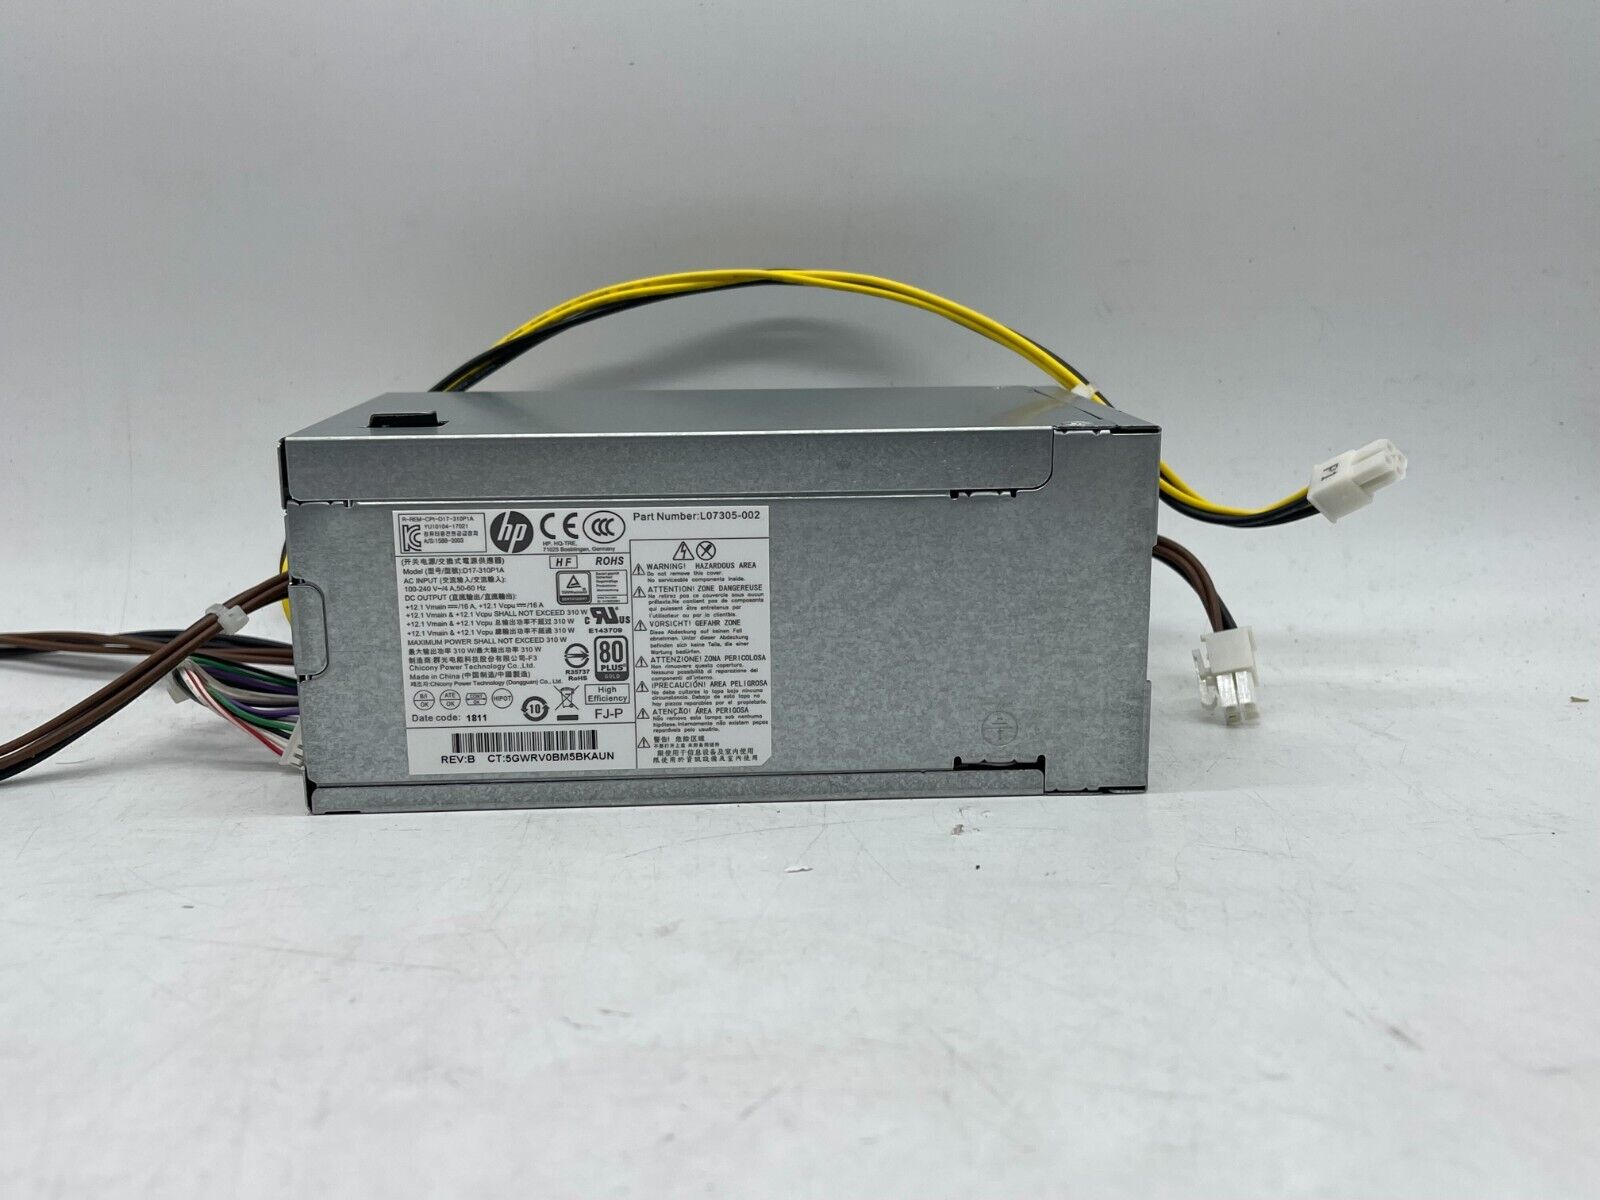 HP L07305-002 Z2 G4 SFF Workstation 4-Pin 310W Power Supply Model: D17-310P1A